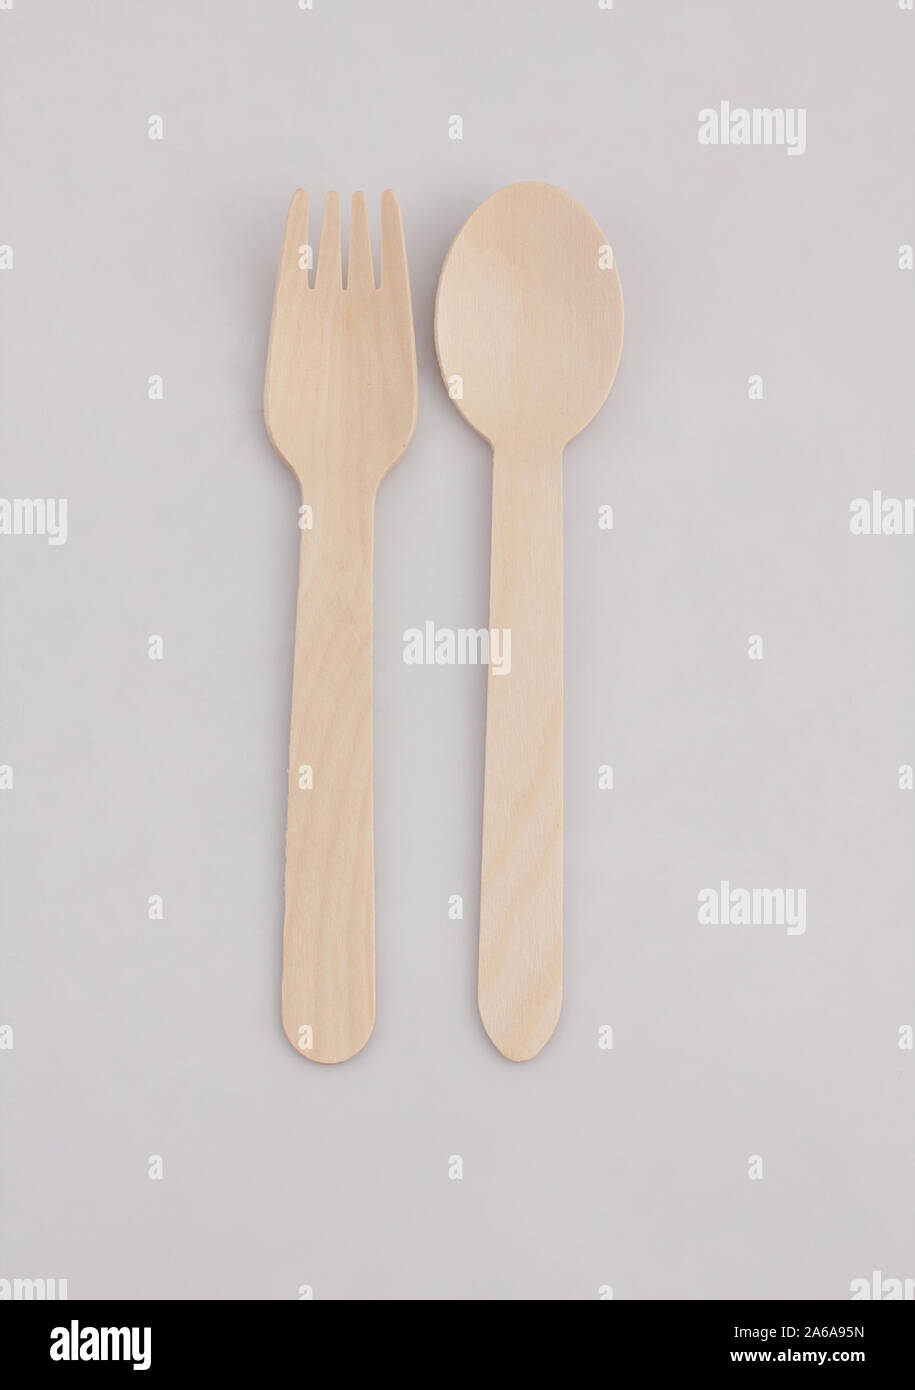 kitchenware set of wooden spoon and fork isolated on white background Stock Photo